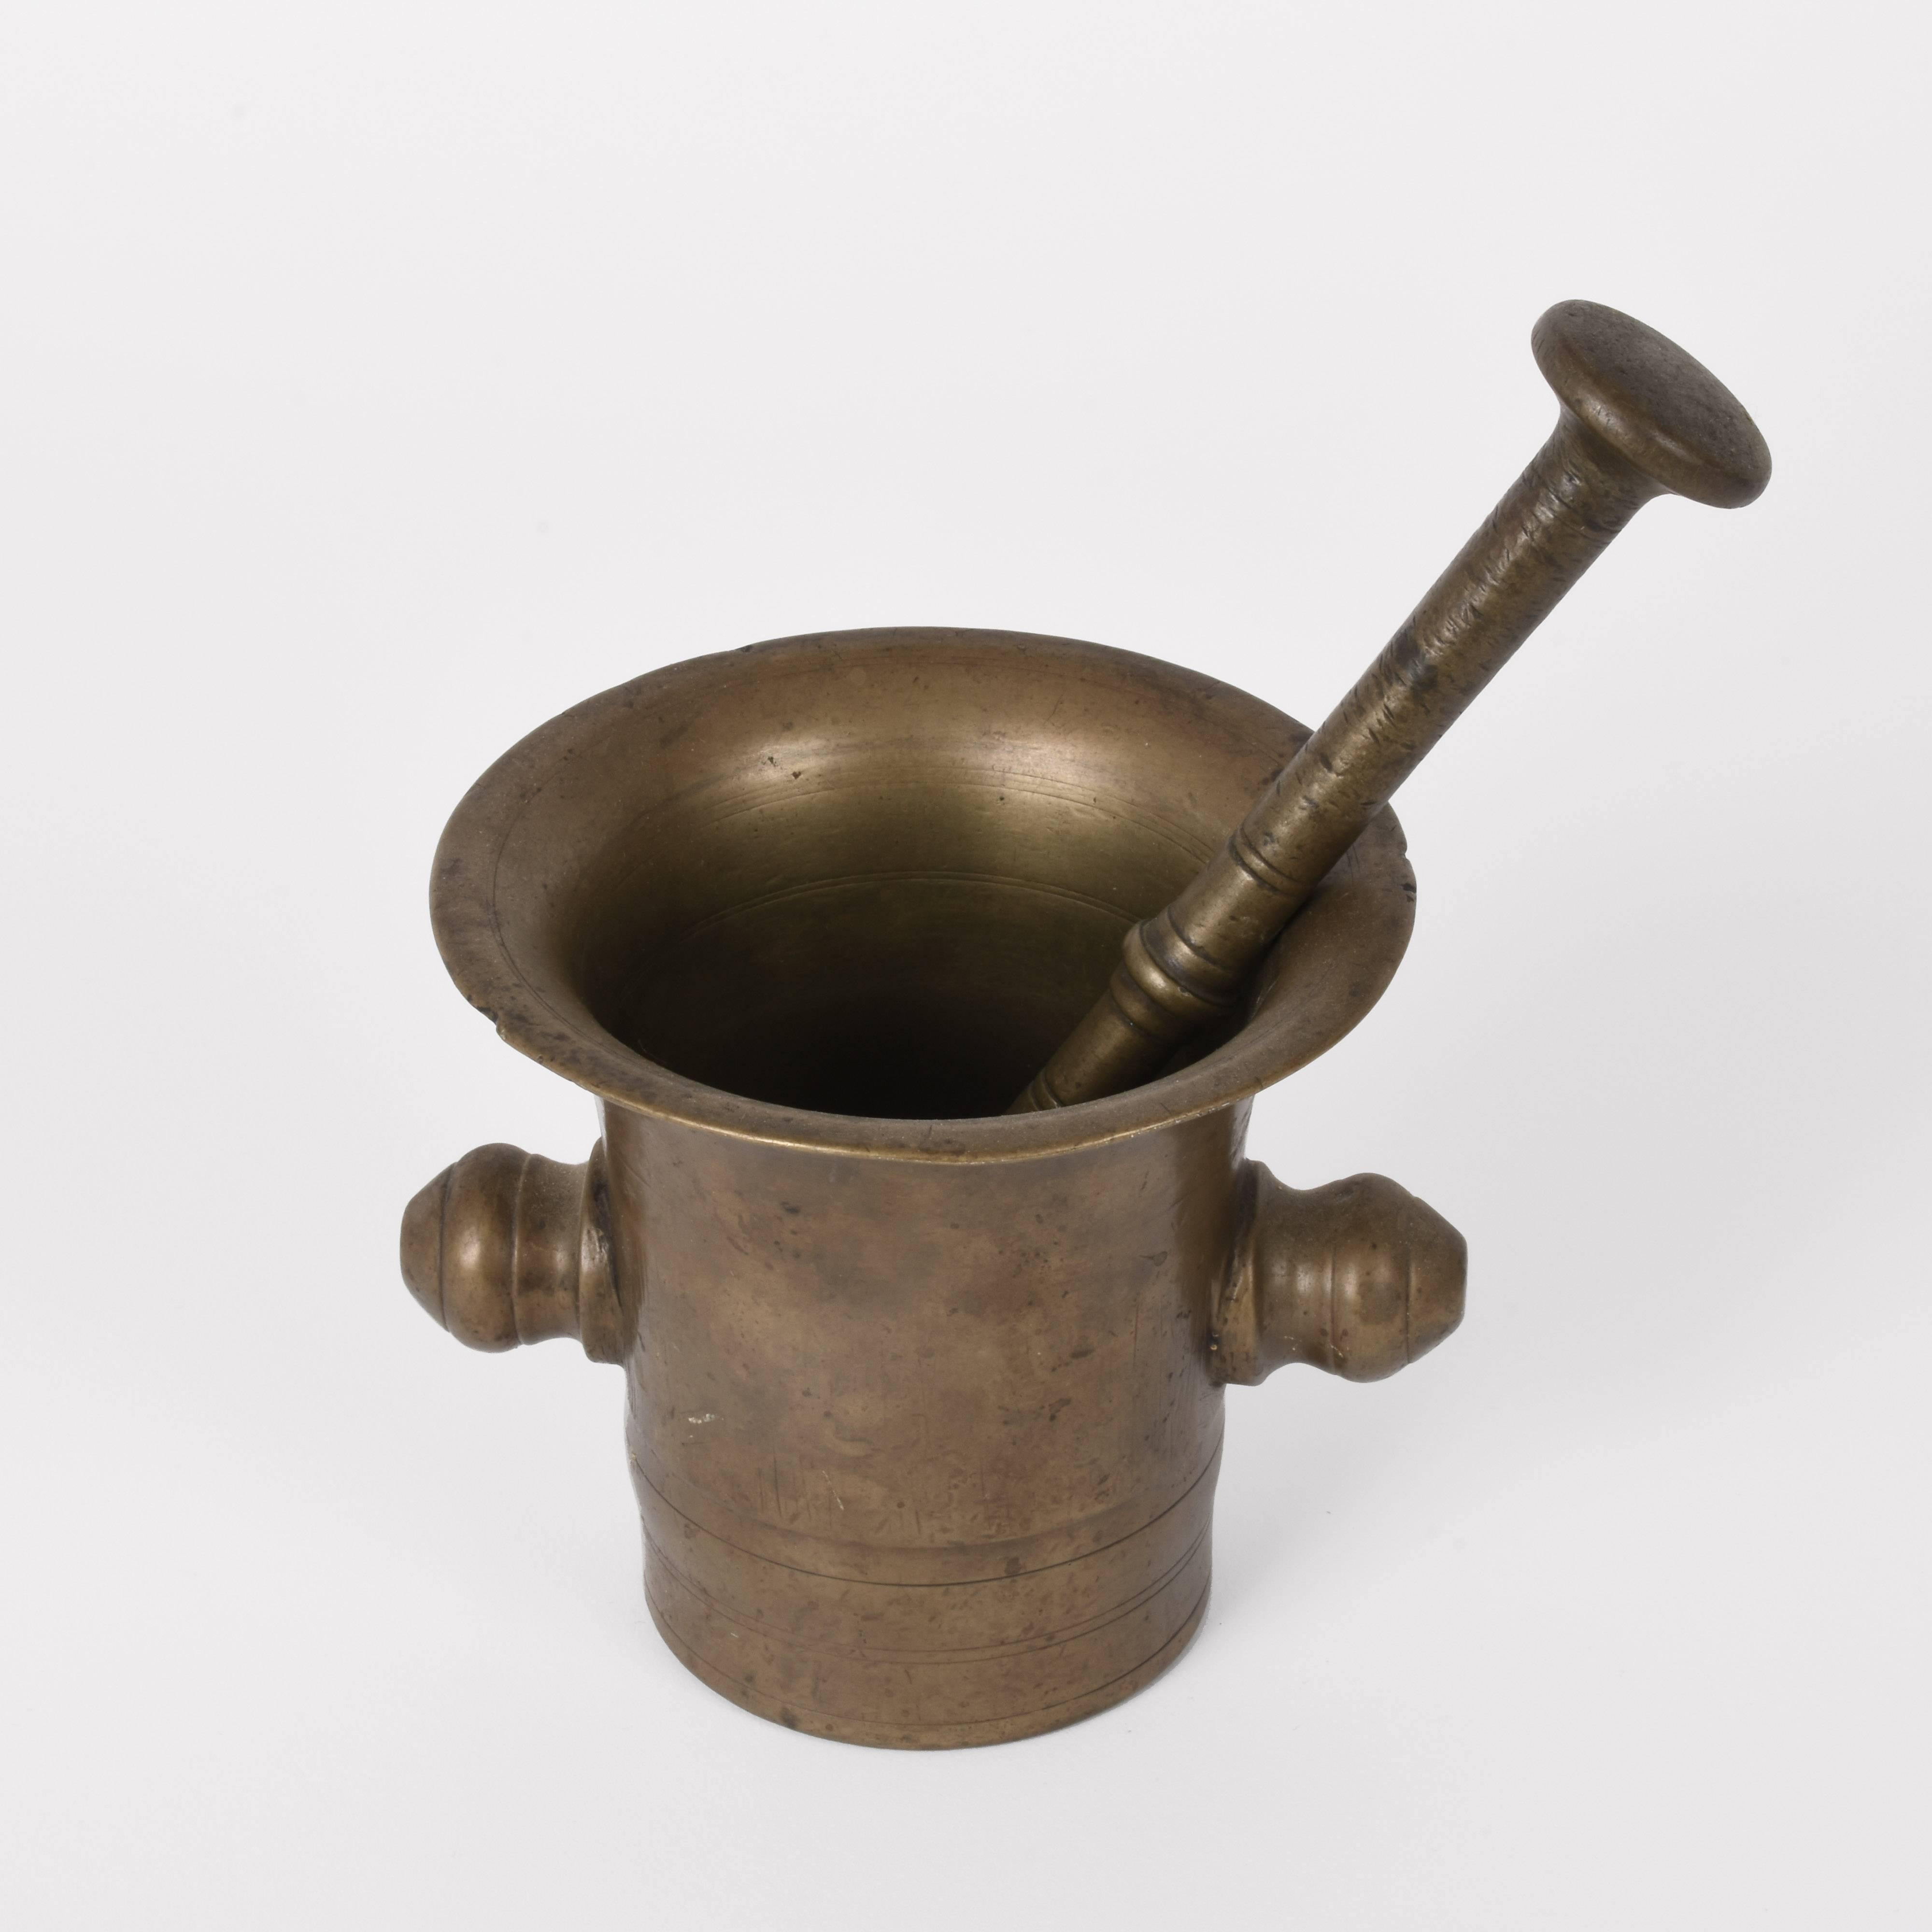 19th-century grand tour antique handmade bronze mortar with pestle. This fantastic piece has an original patina.

The pestle is 9.05 inc high with the mortar with a deep and sleek design.

A great way to decorate a kitchen with a historical